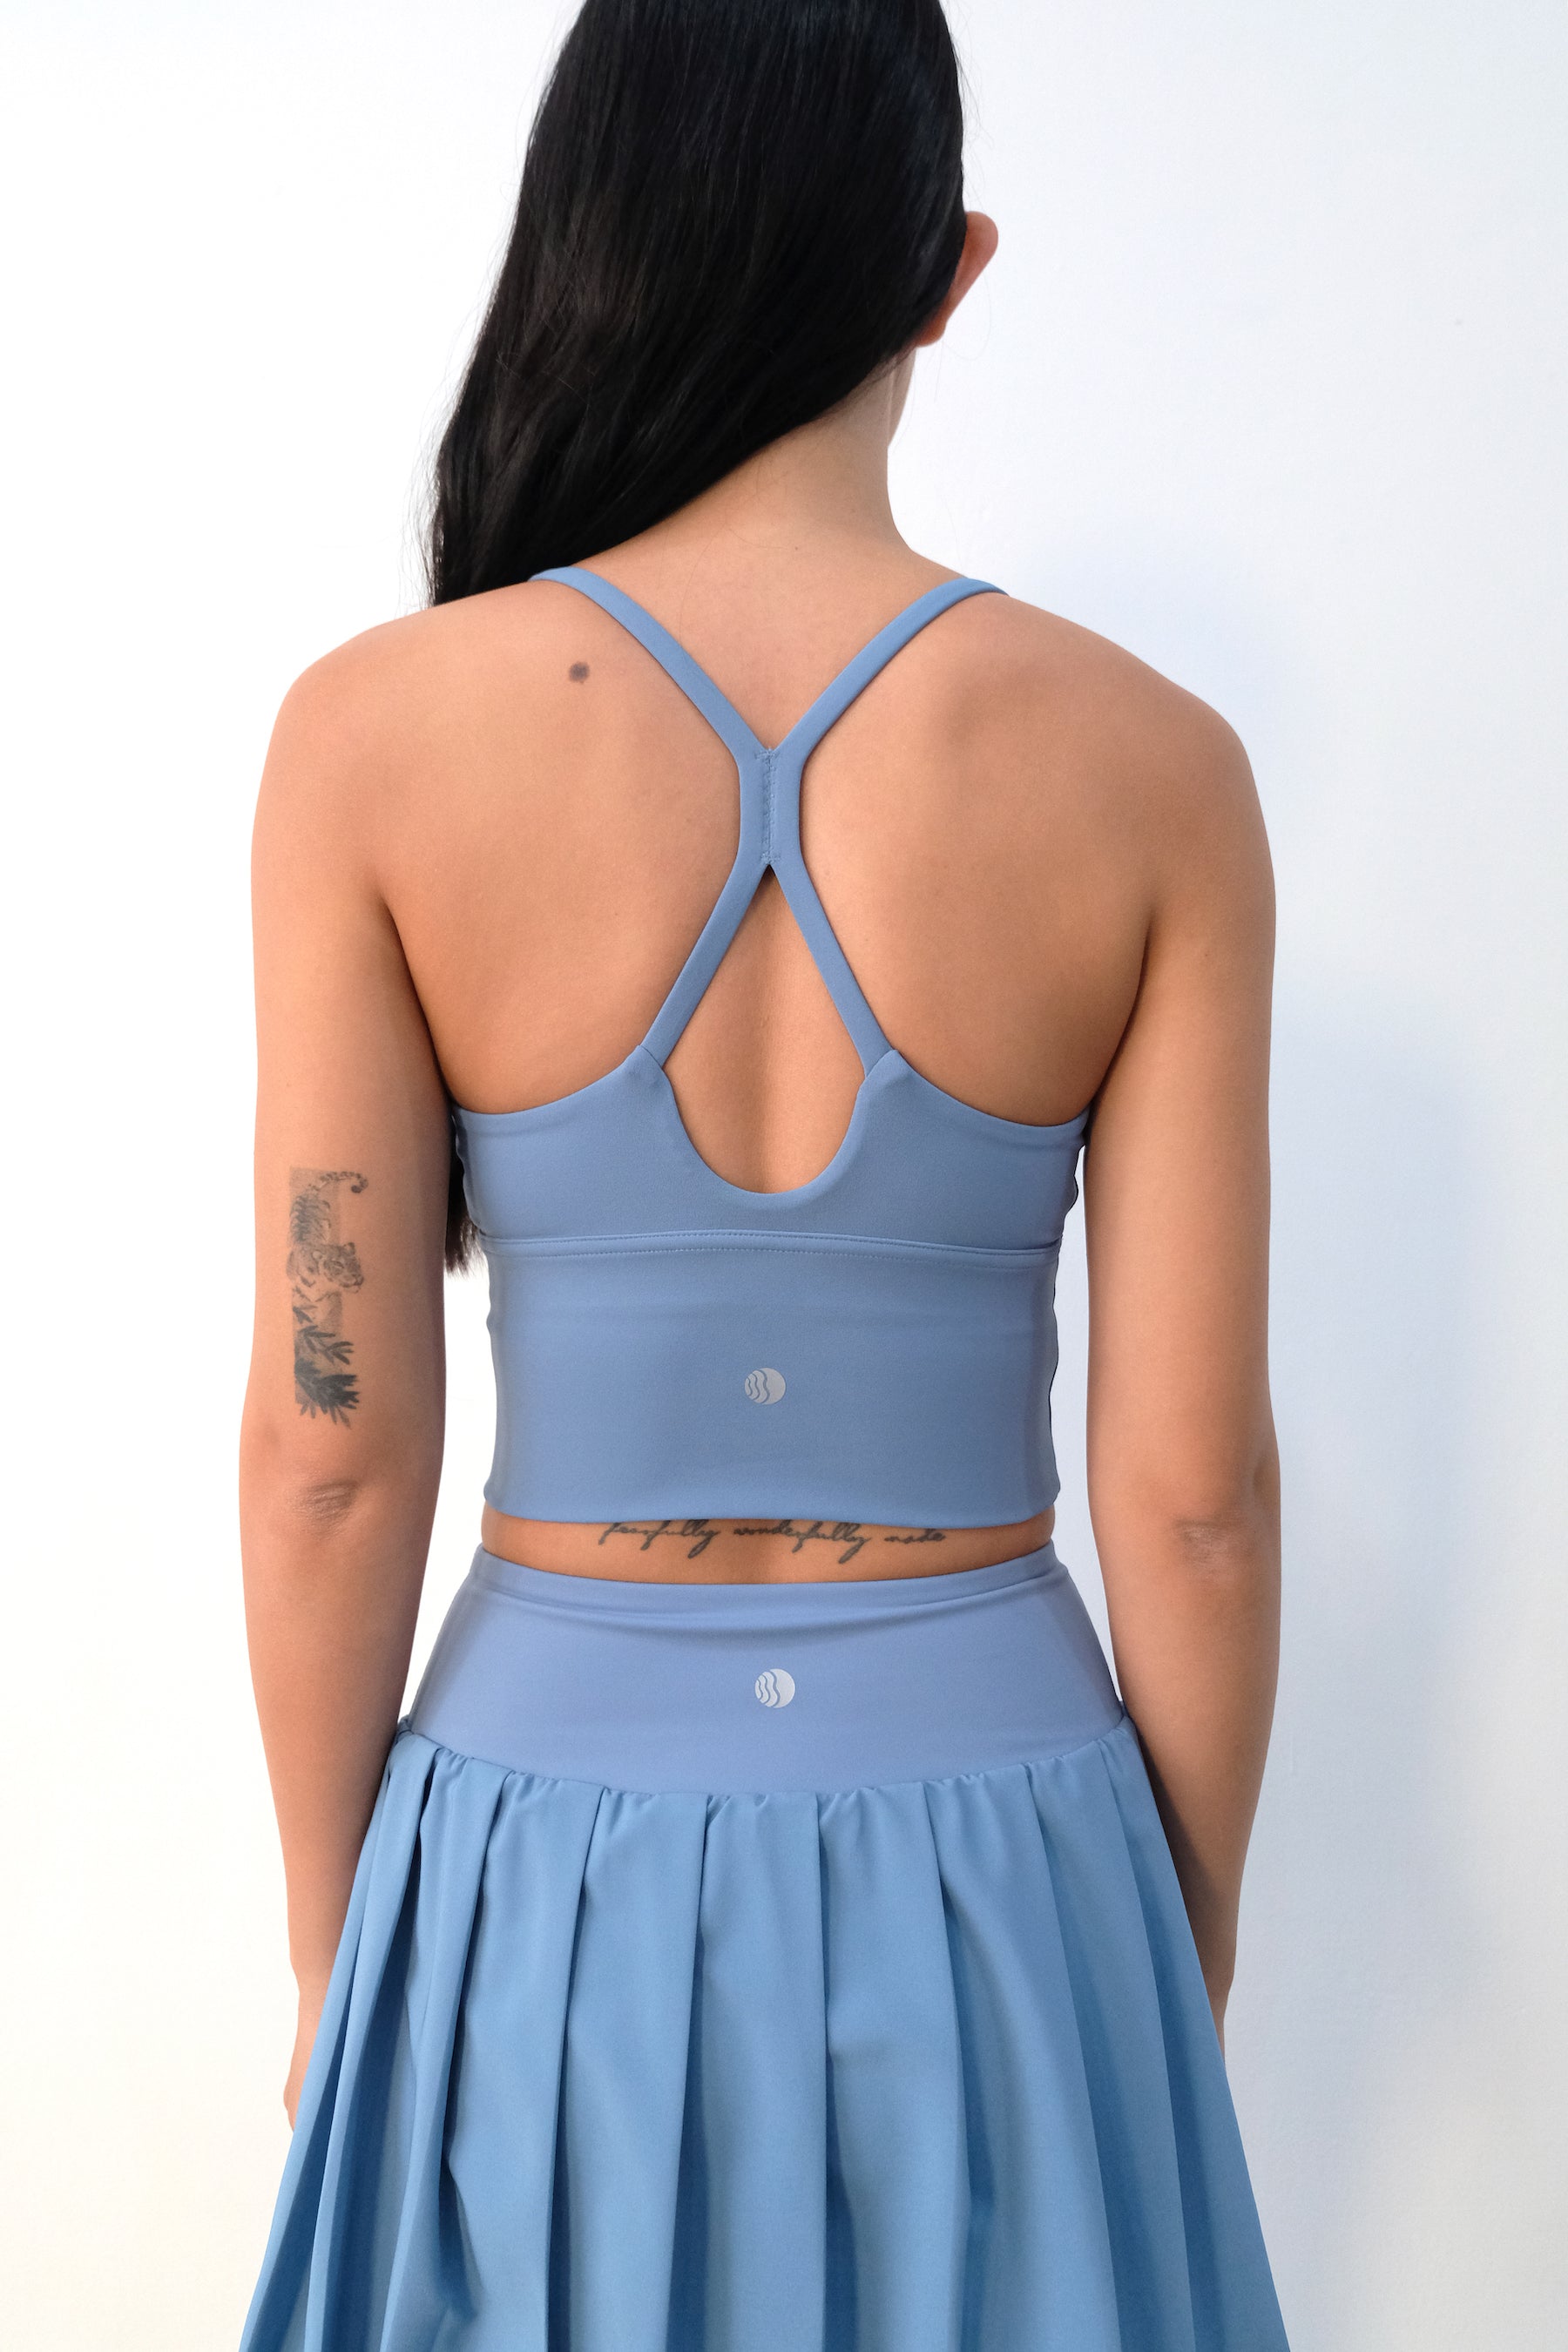 Ace Tennis Skirt In French Blue (4 LEFT)